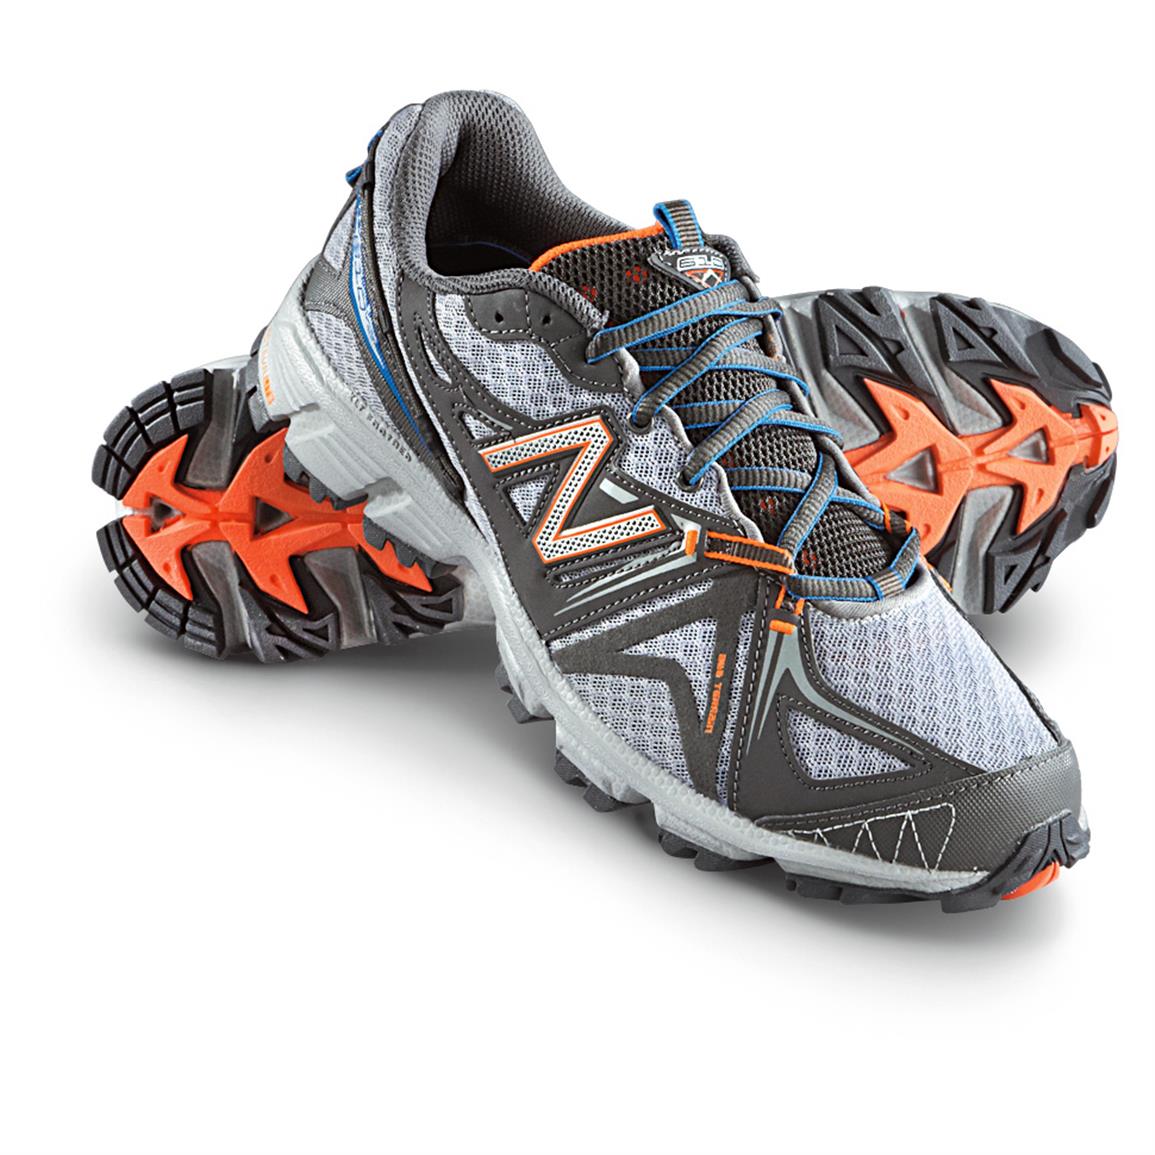 New Balance All Terrain 610 Top Sellers, UP TO 59% OFF